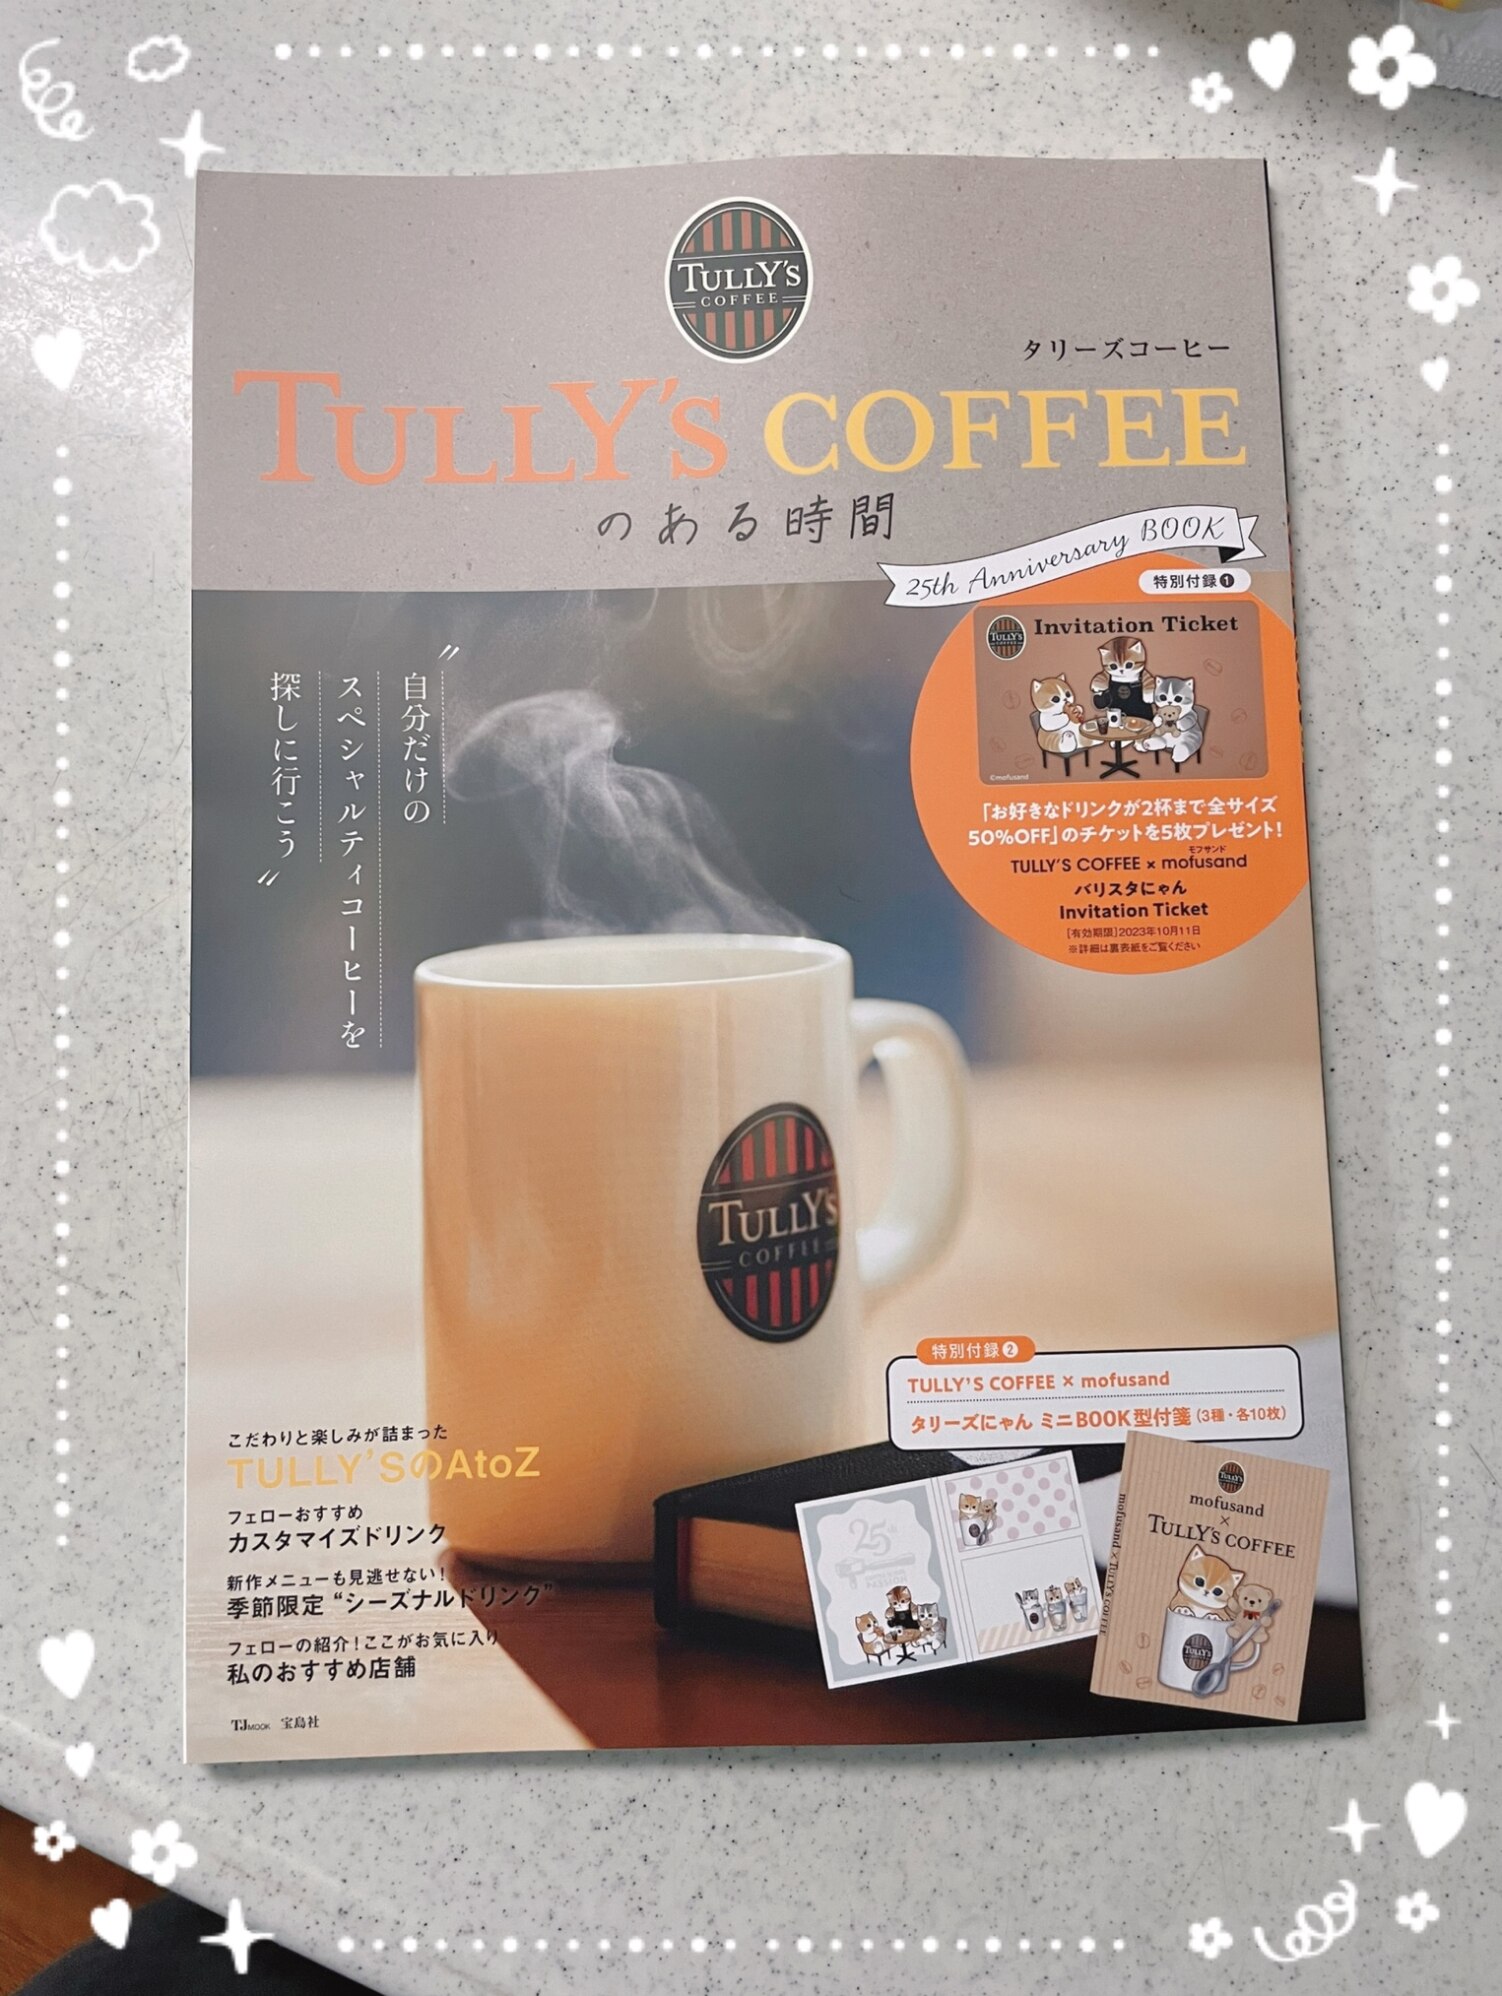 TULLY'S COFFEE 25th Anniversary BOOK 本のみ - 通販 - nickhealey.co.uk